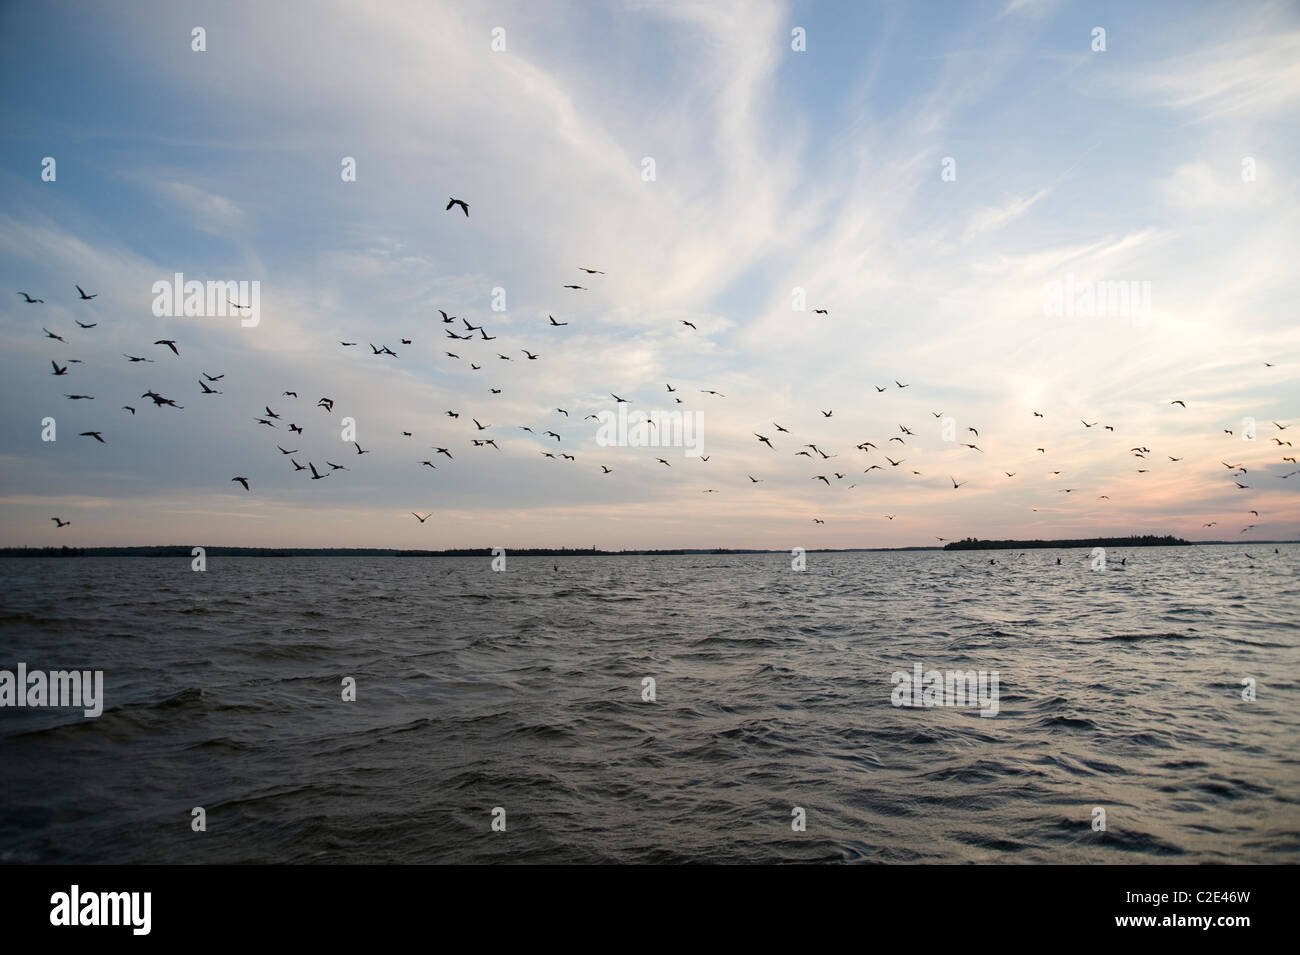 Lake Of The Woods, Ontario, Canada; Flock Of Birds Flying Over Lake Stock Photo